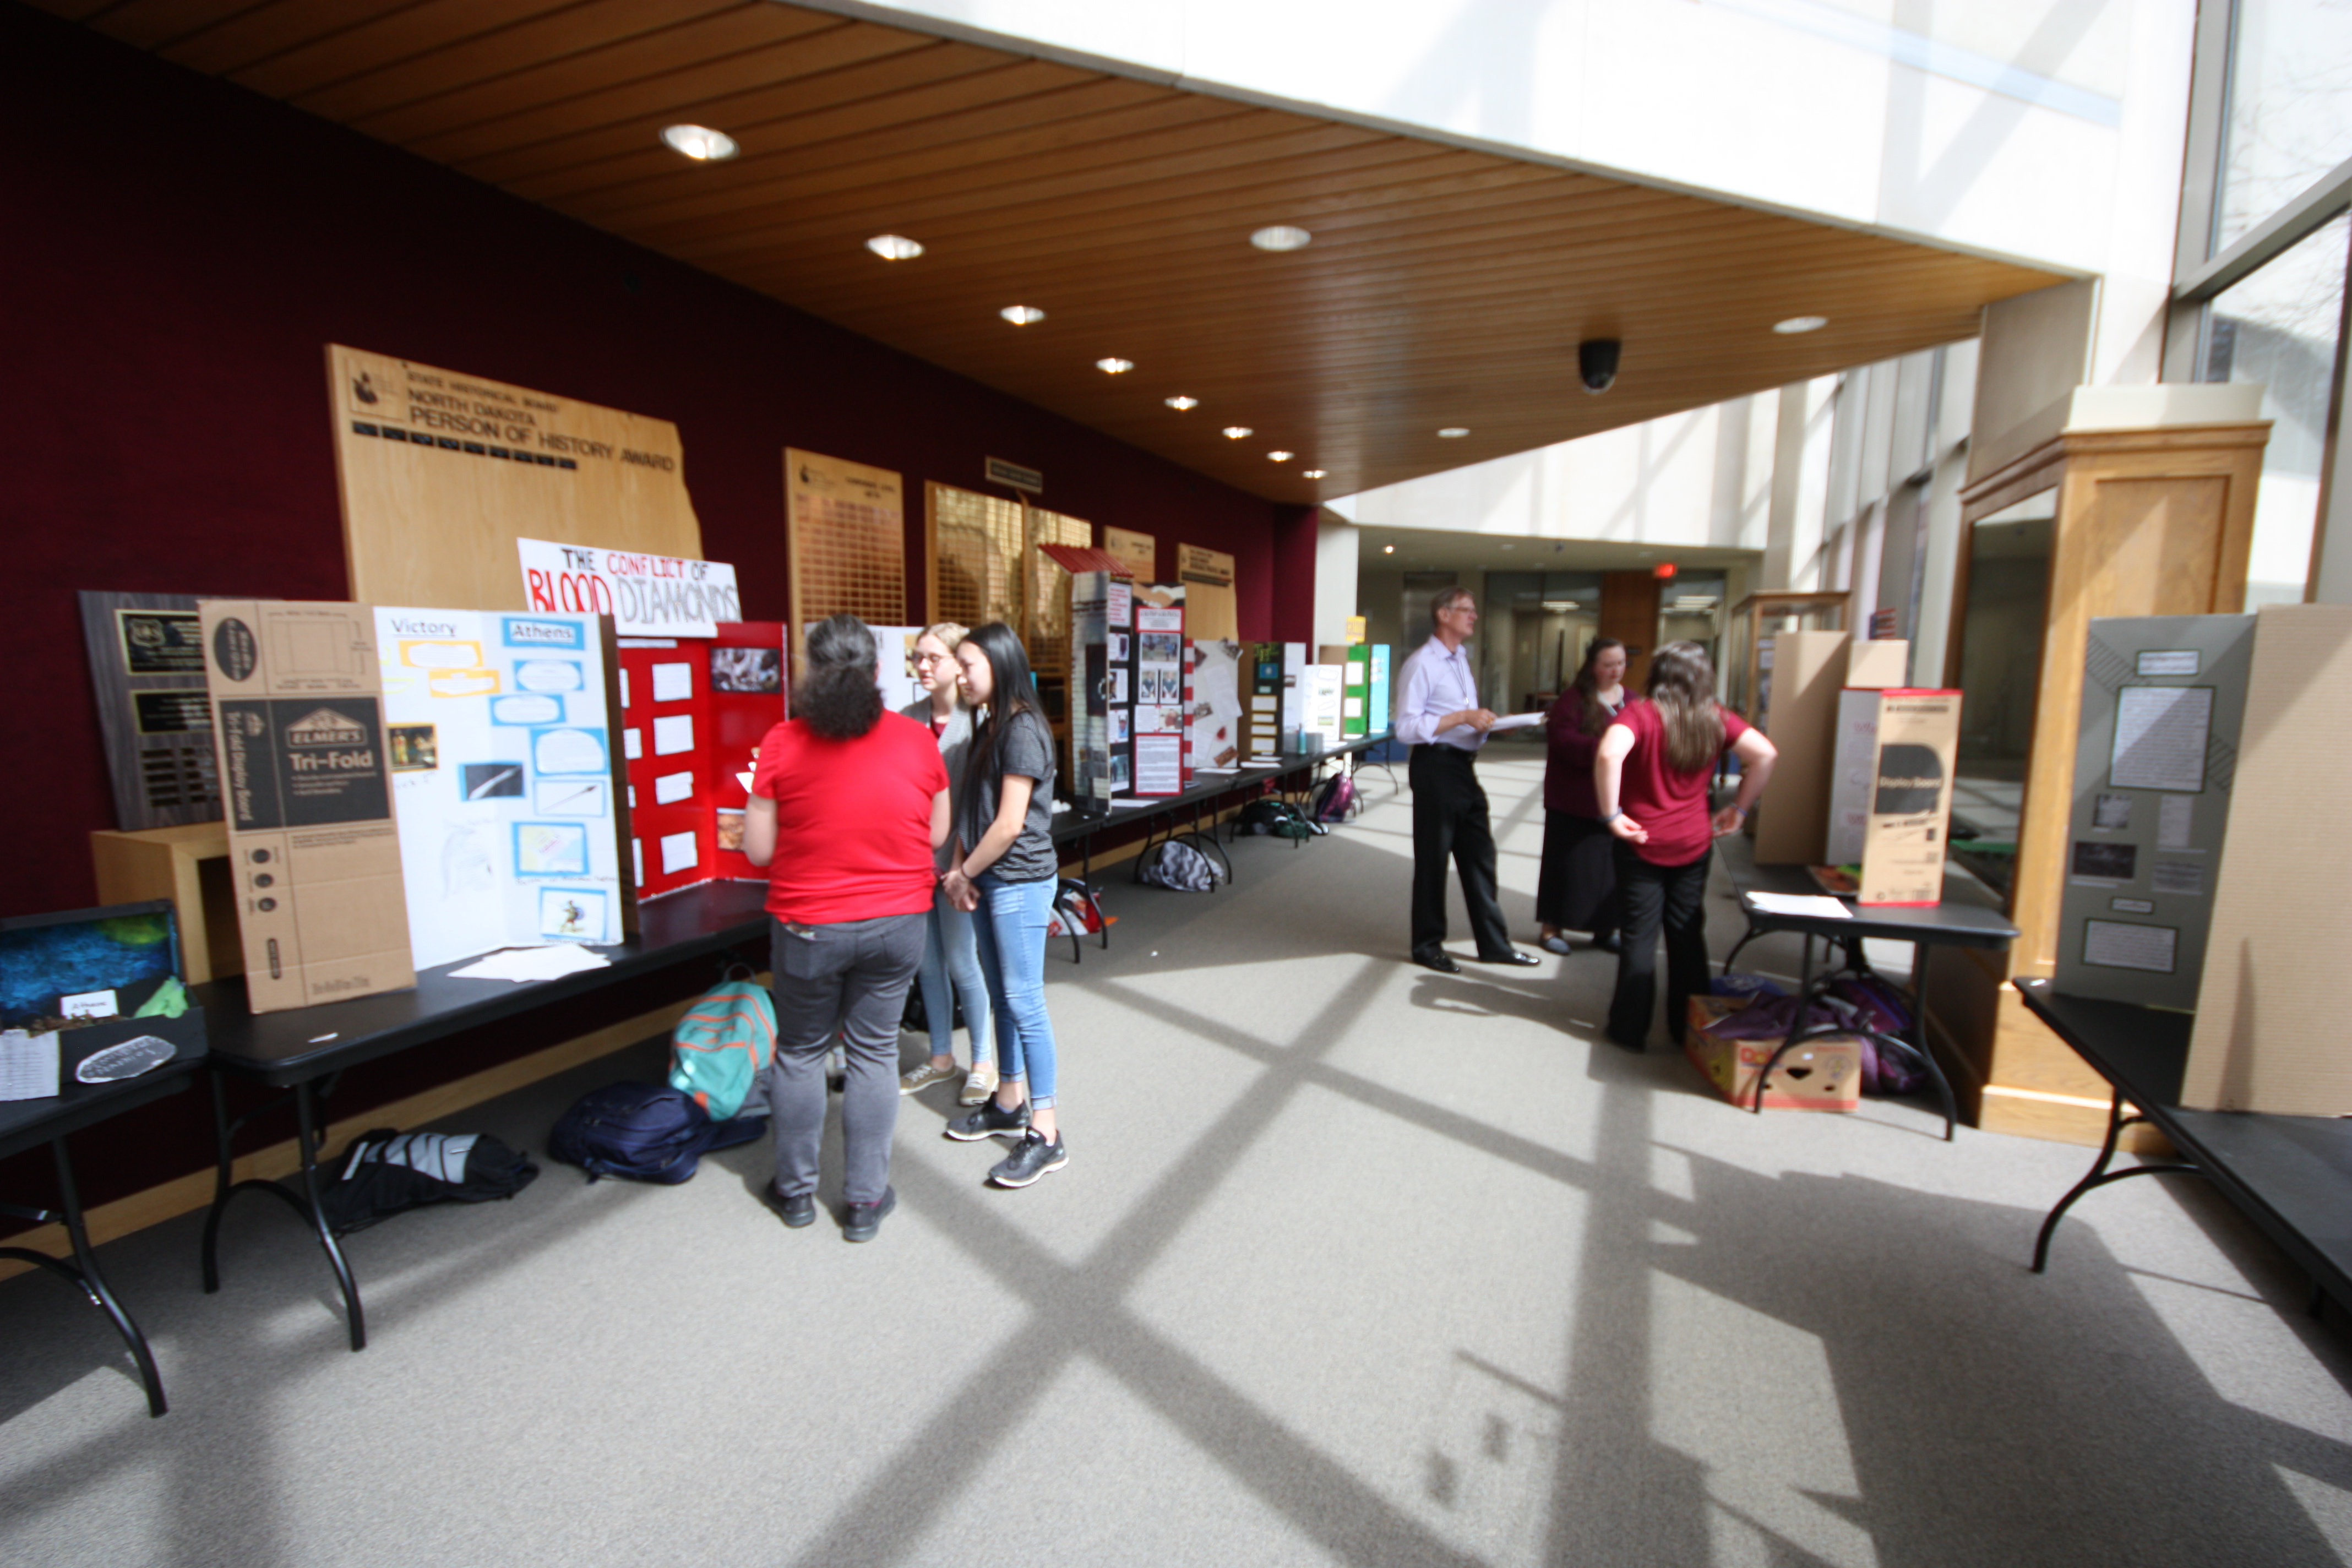 ND Heritage Center with History Day contestant exhibits and judges. Judges inquire about the student's project and score according to the contest guidelines.